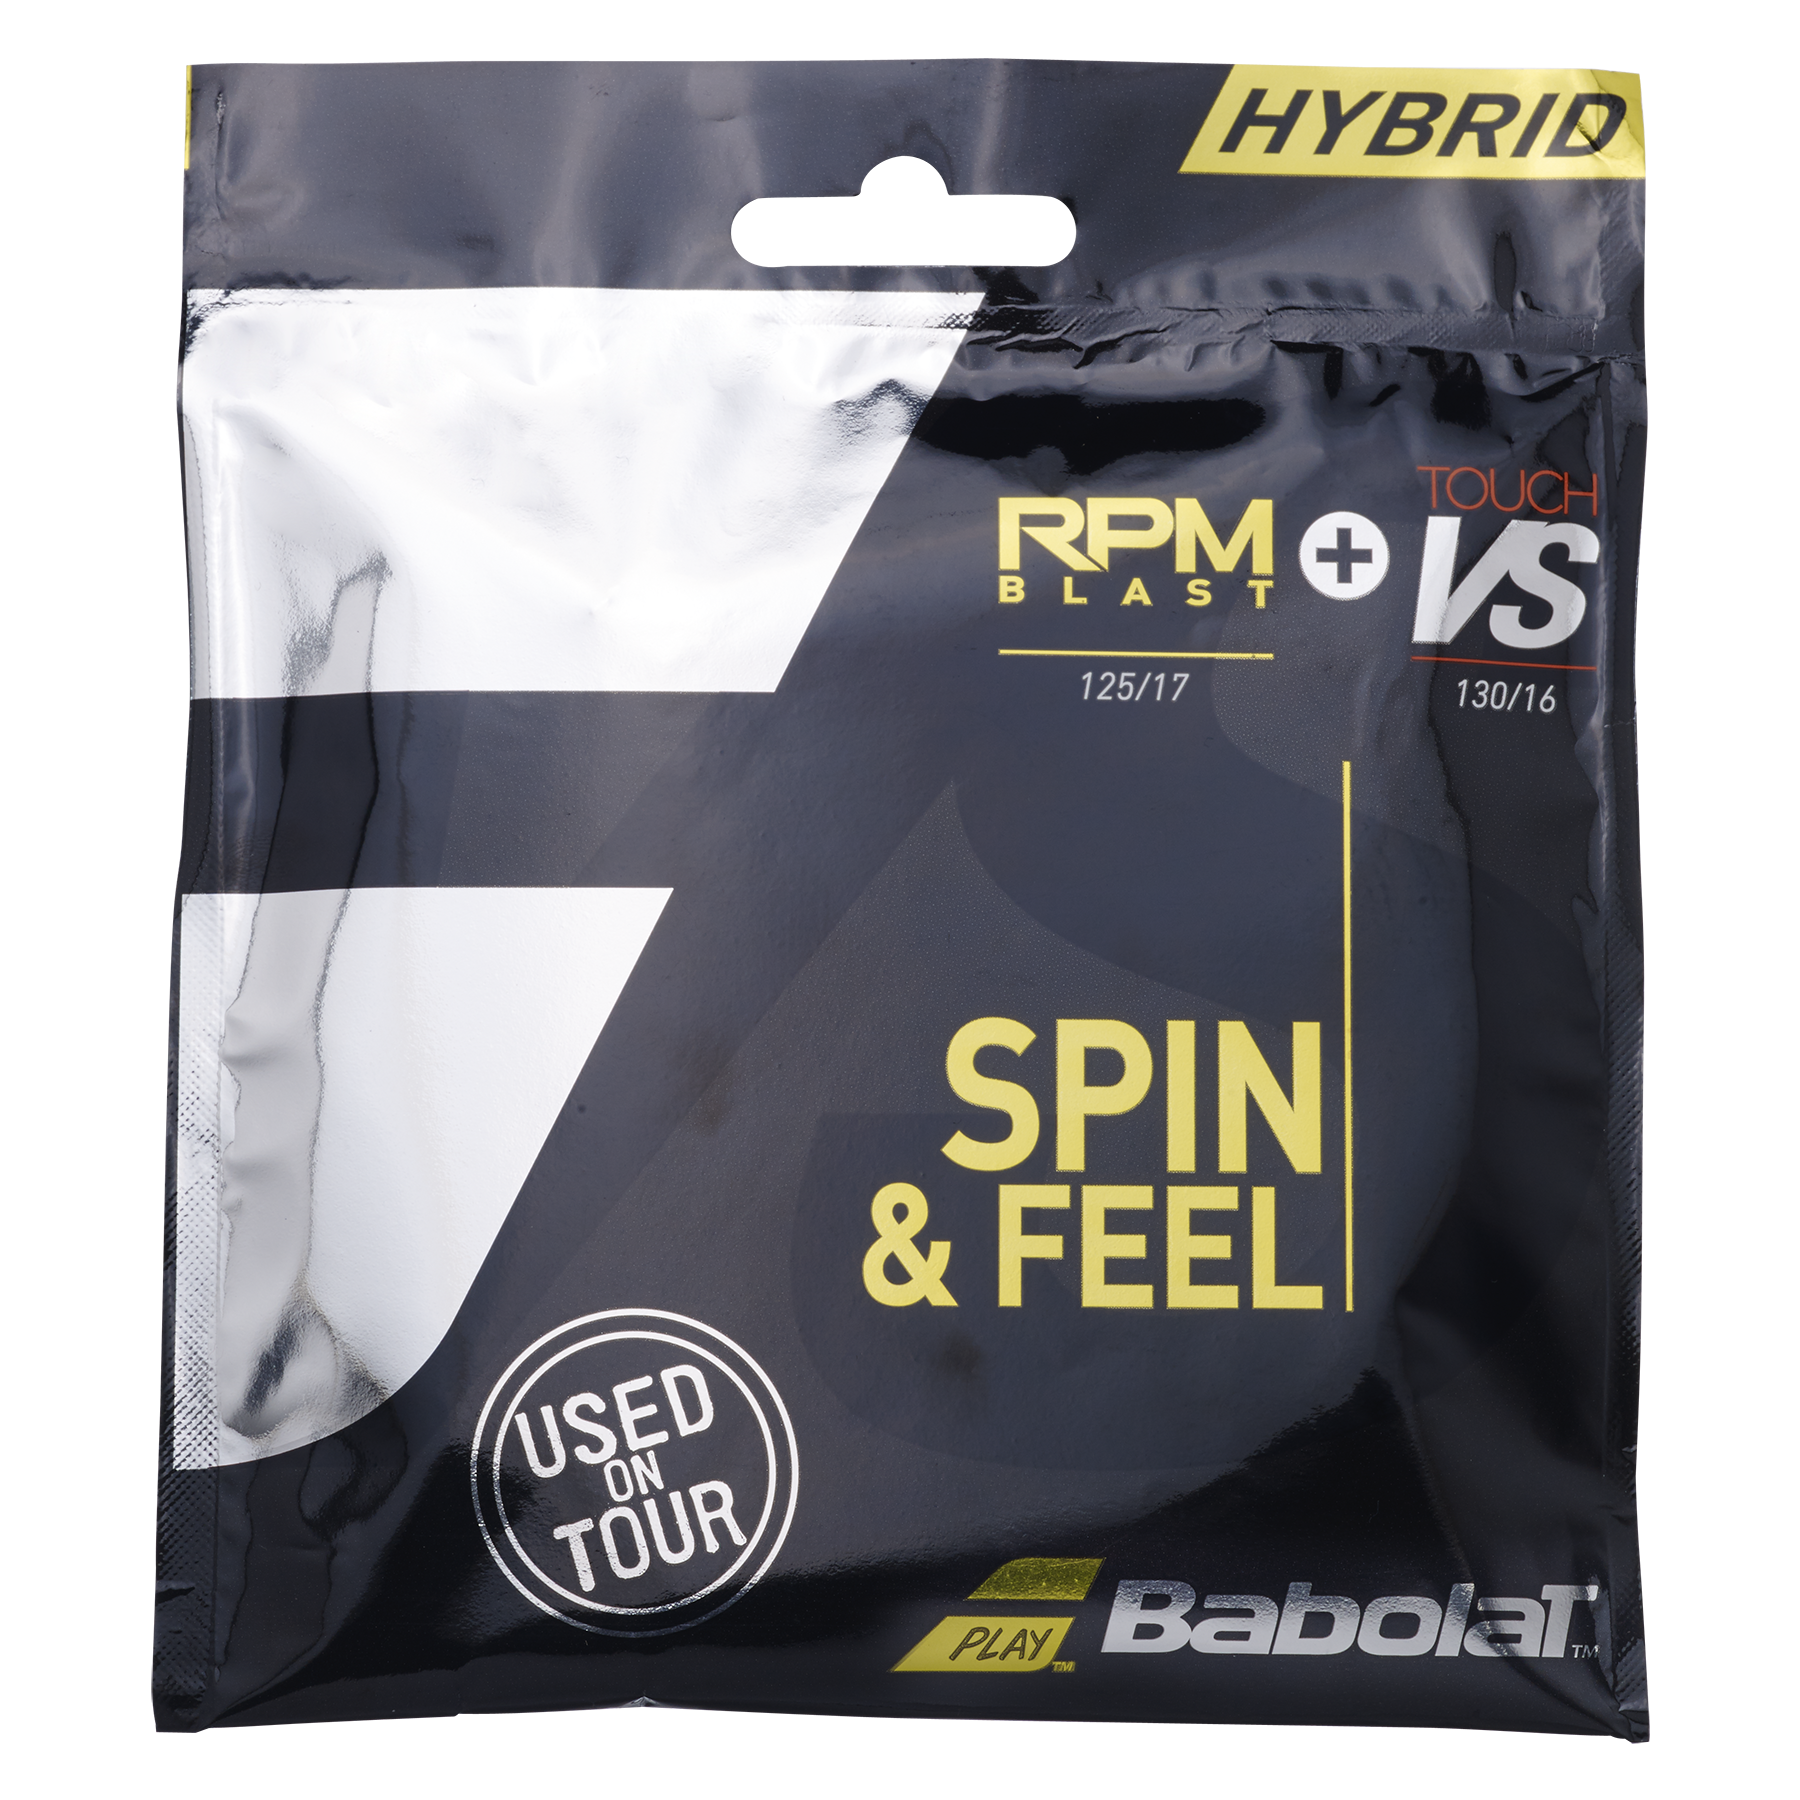 Tennis Strings RPM Blast 125 + Touch VS 130 | Babolat Official Website